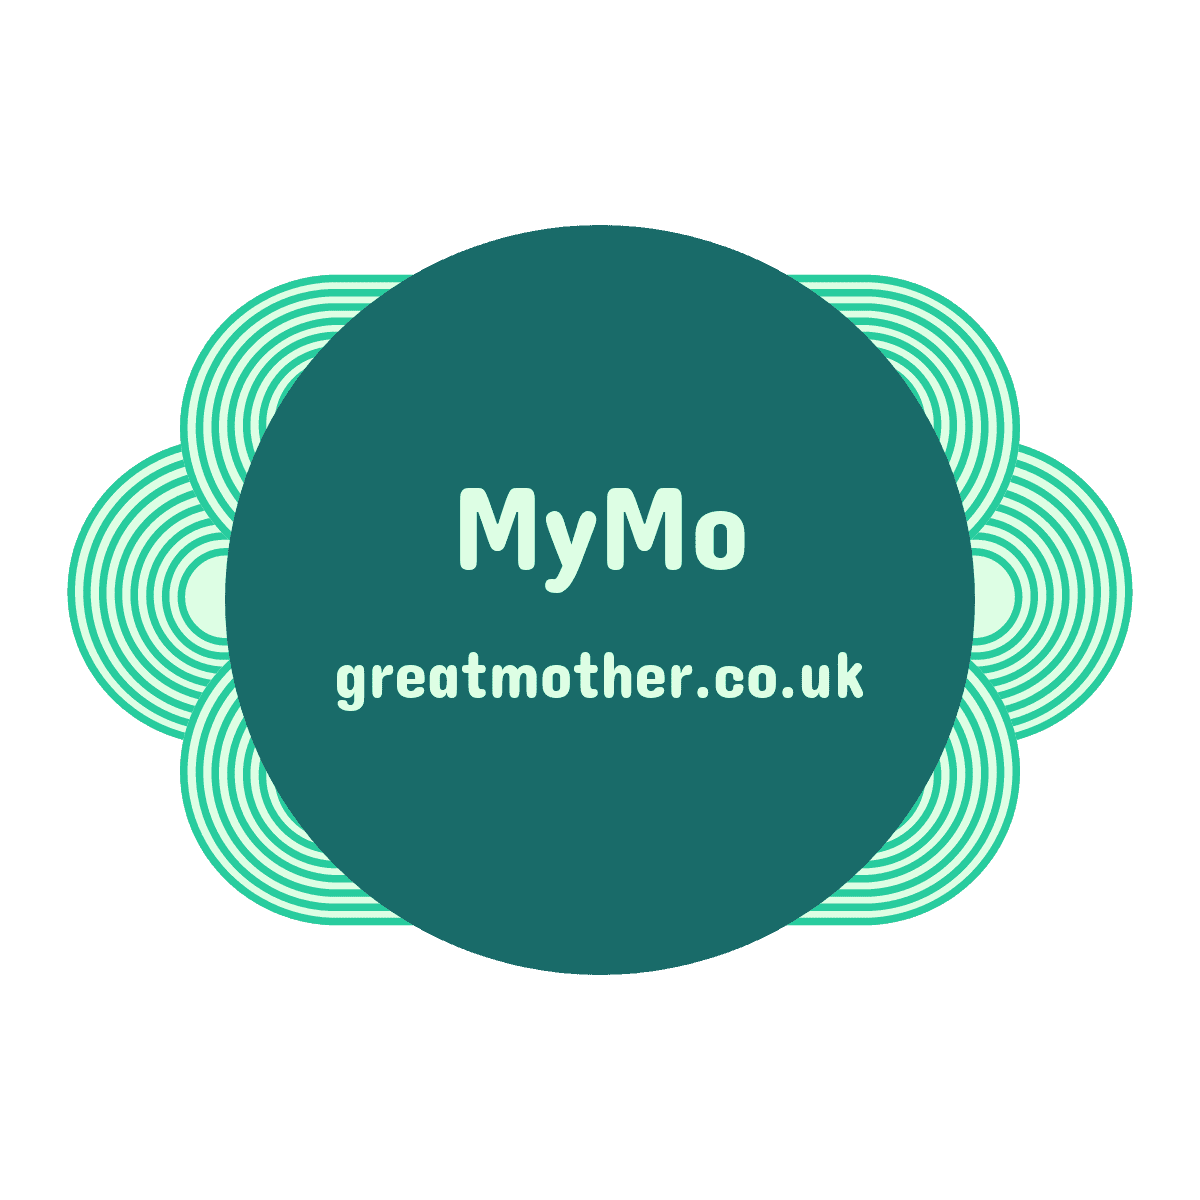 greatmother.co.uk